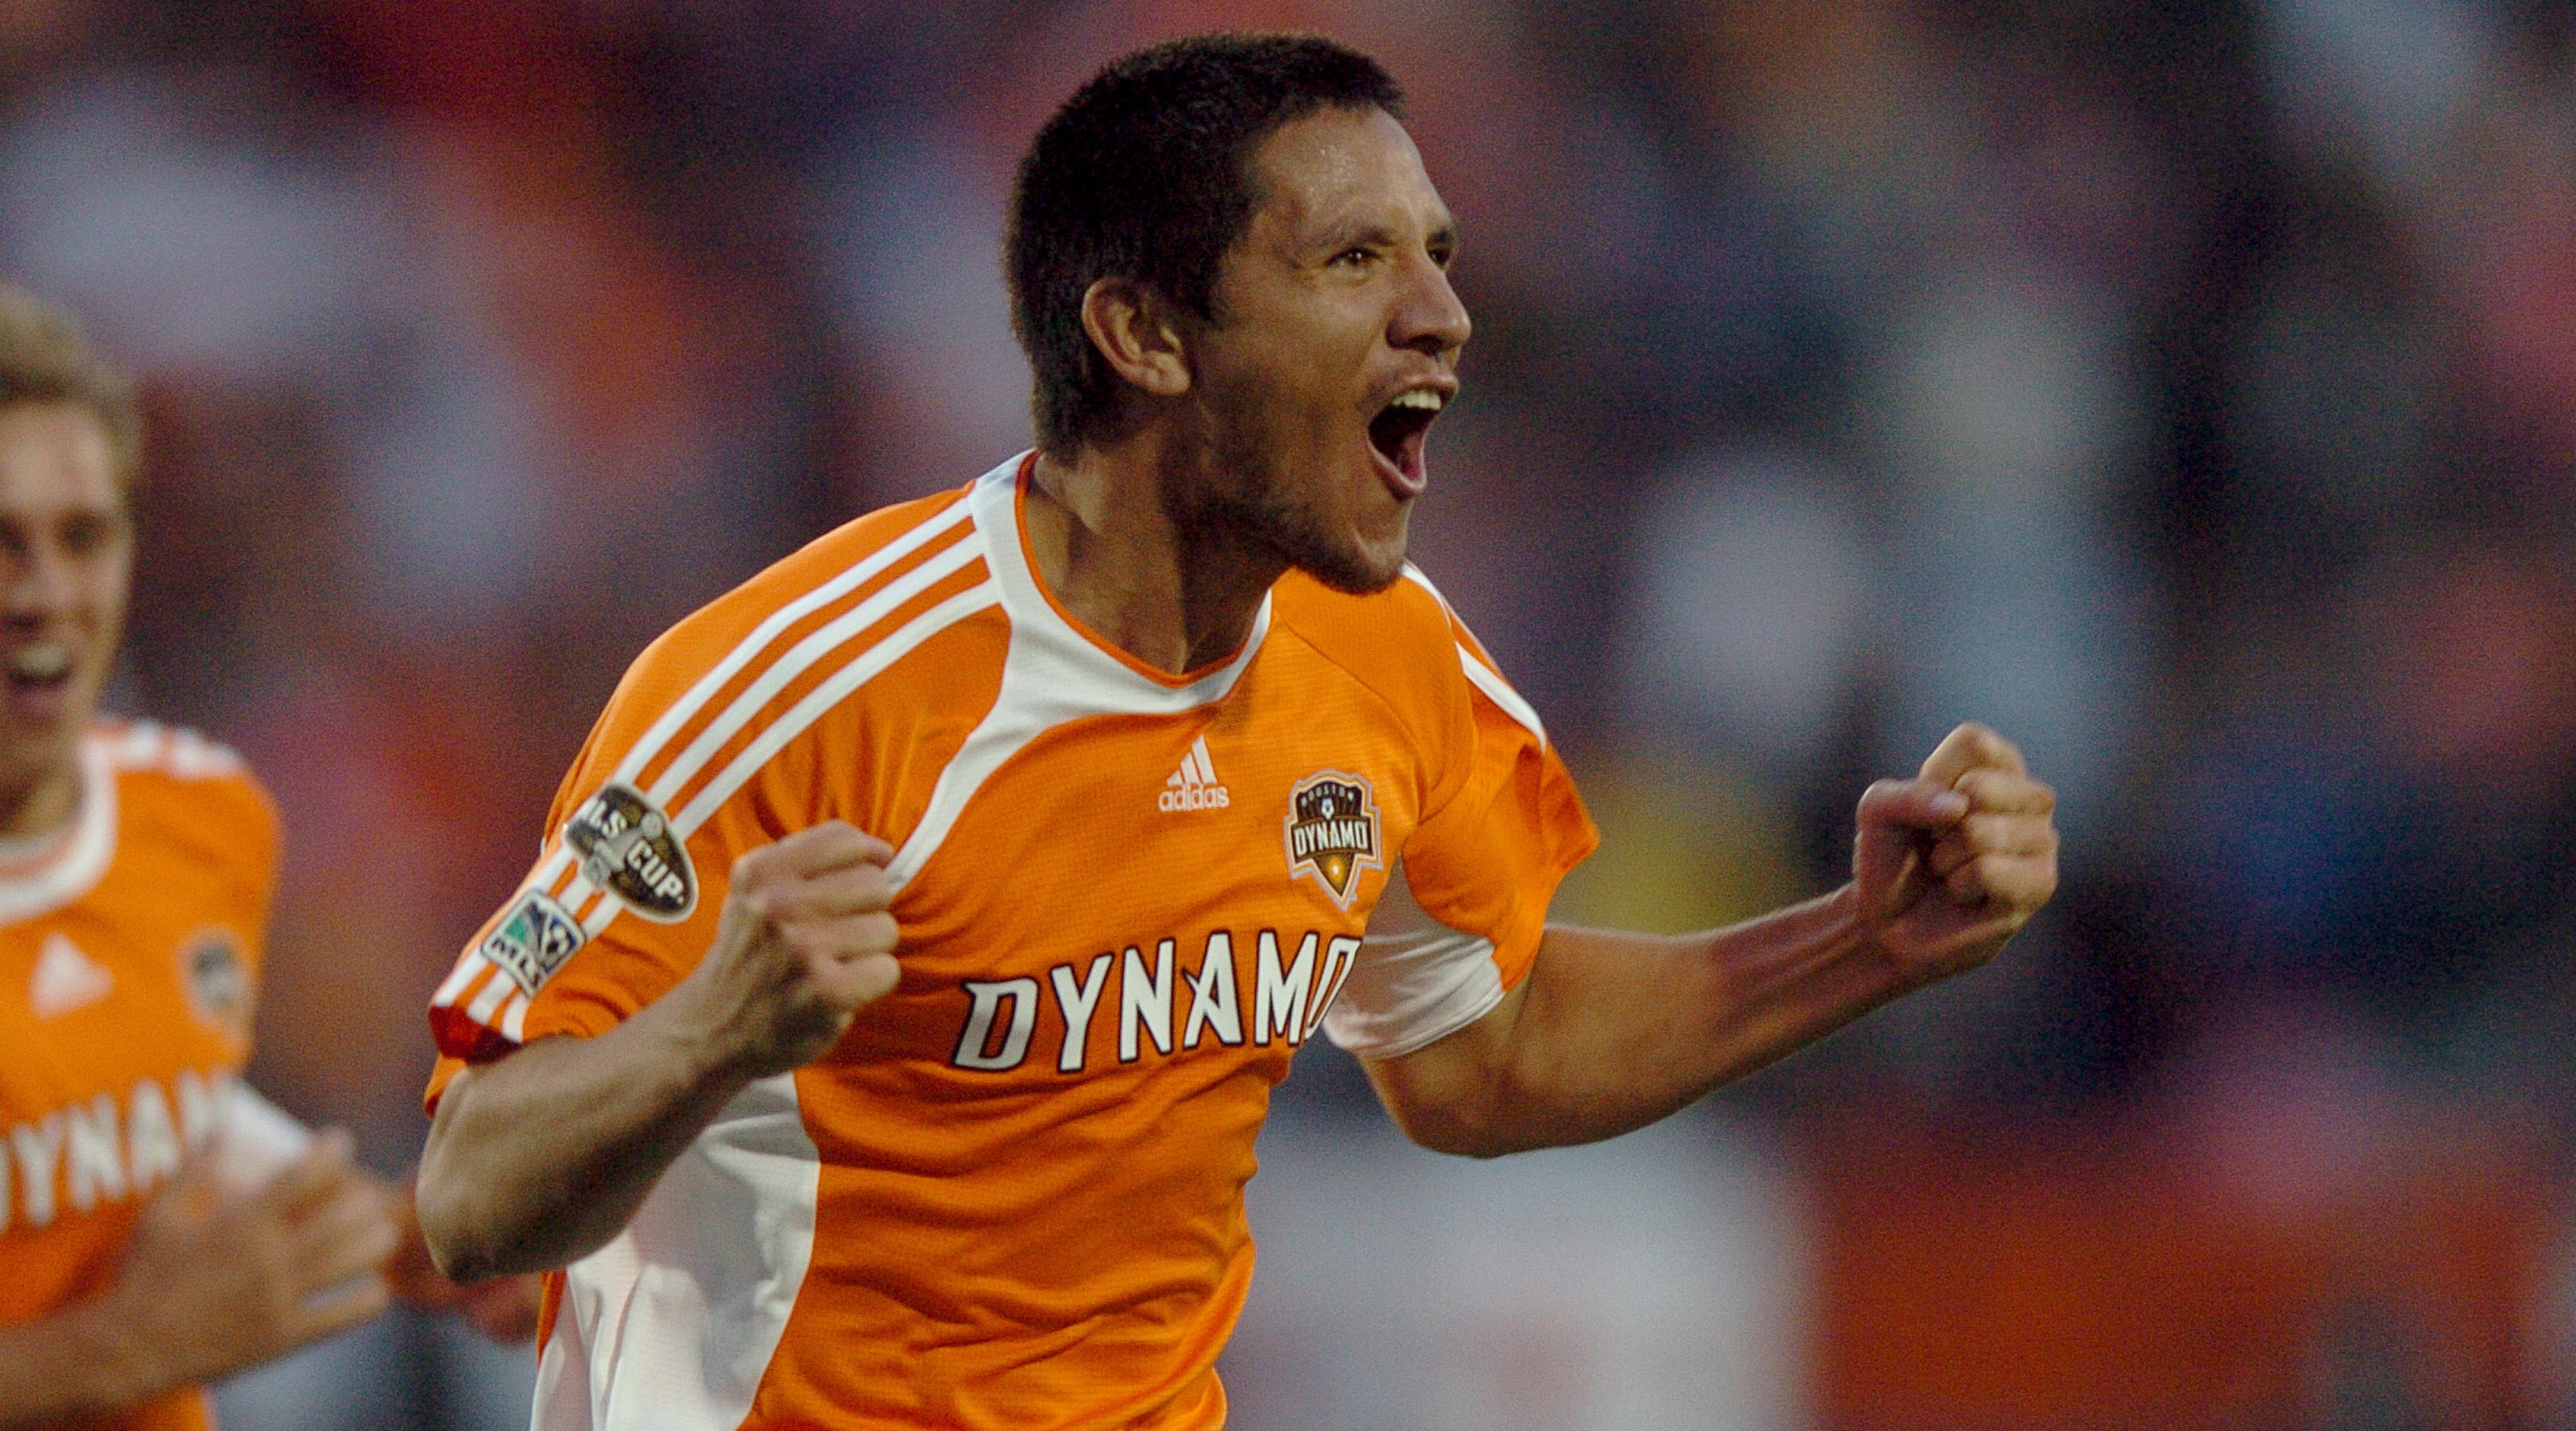 the best mls players of the 00s